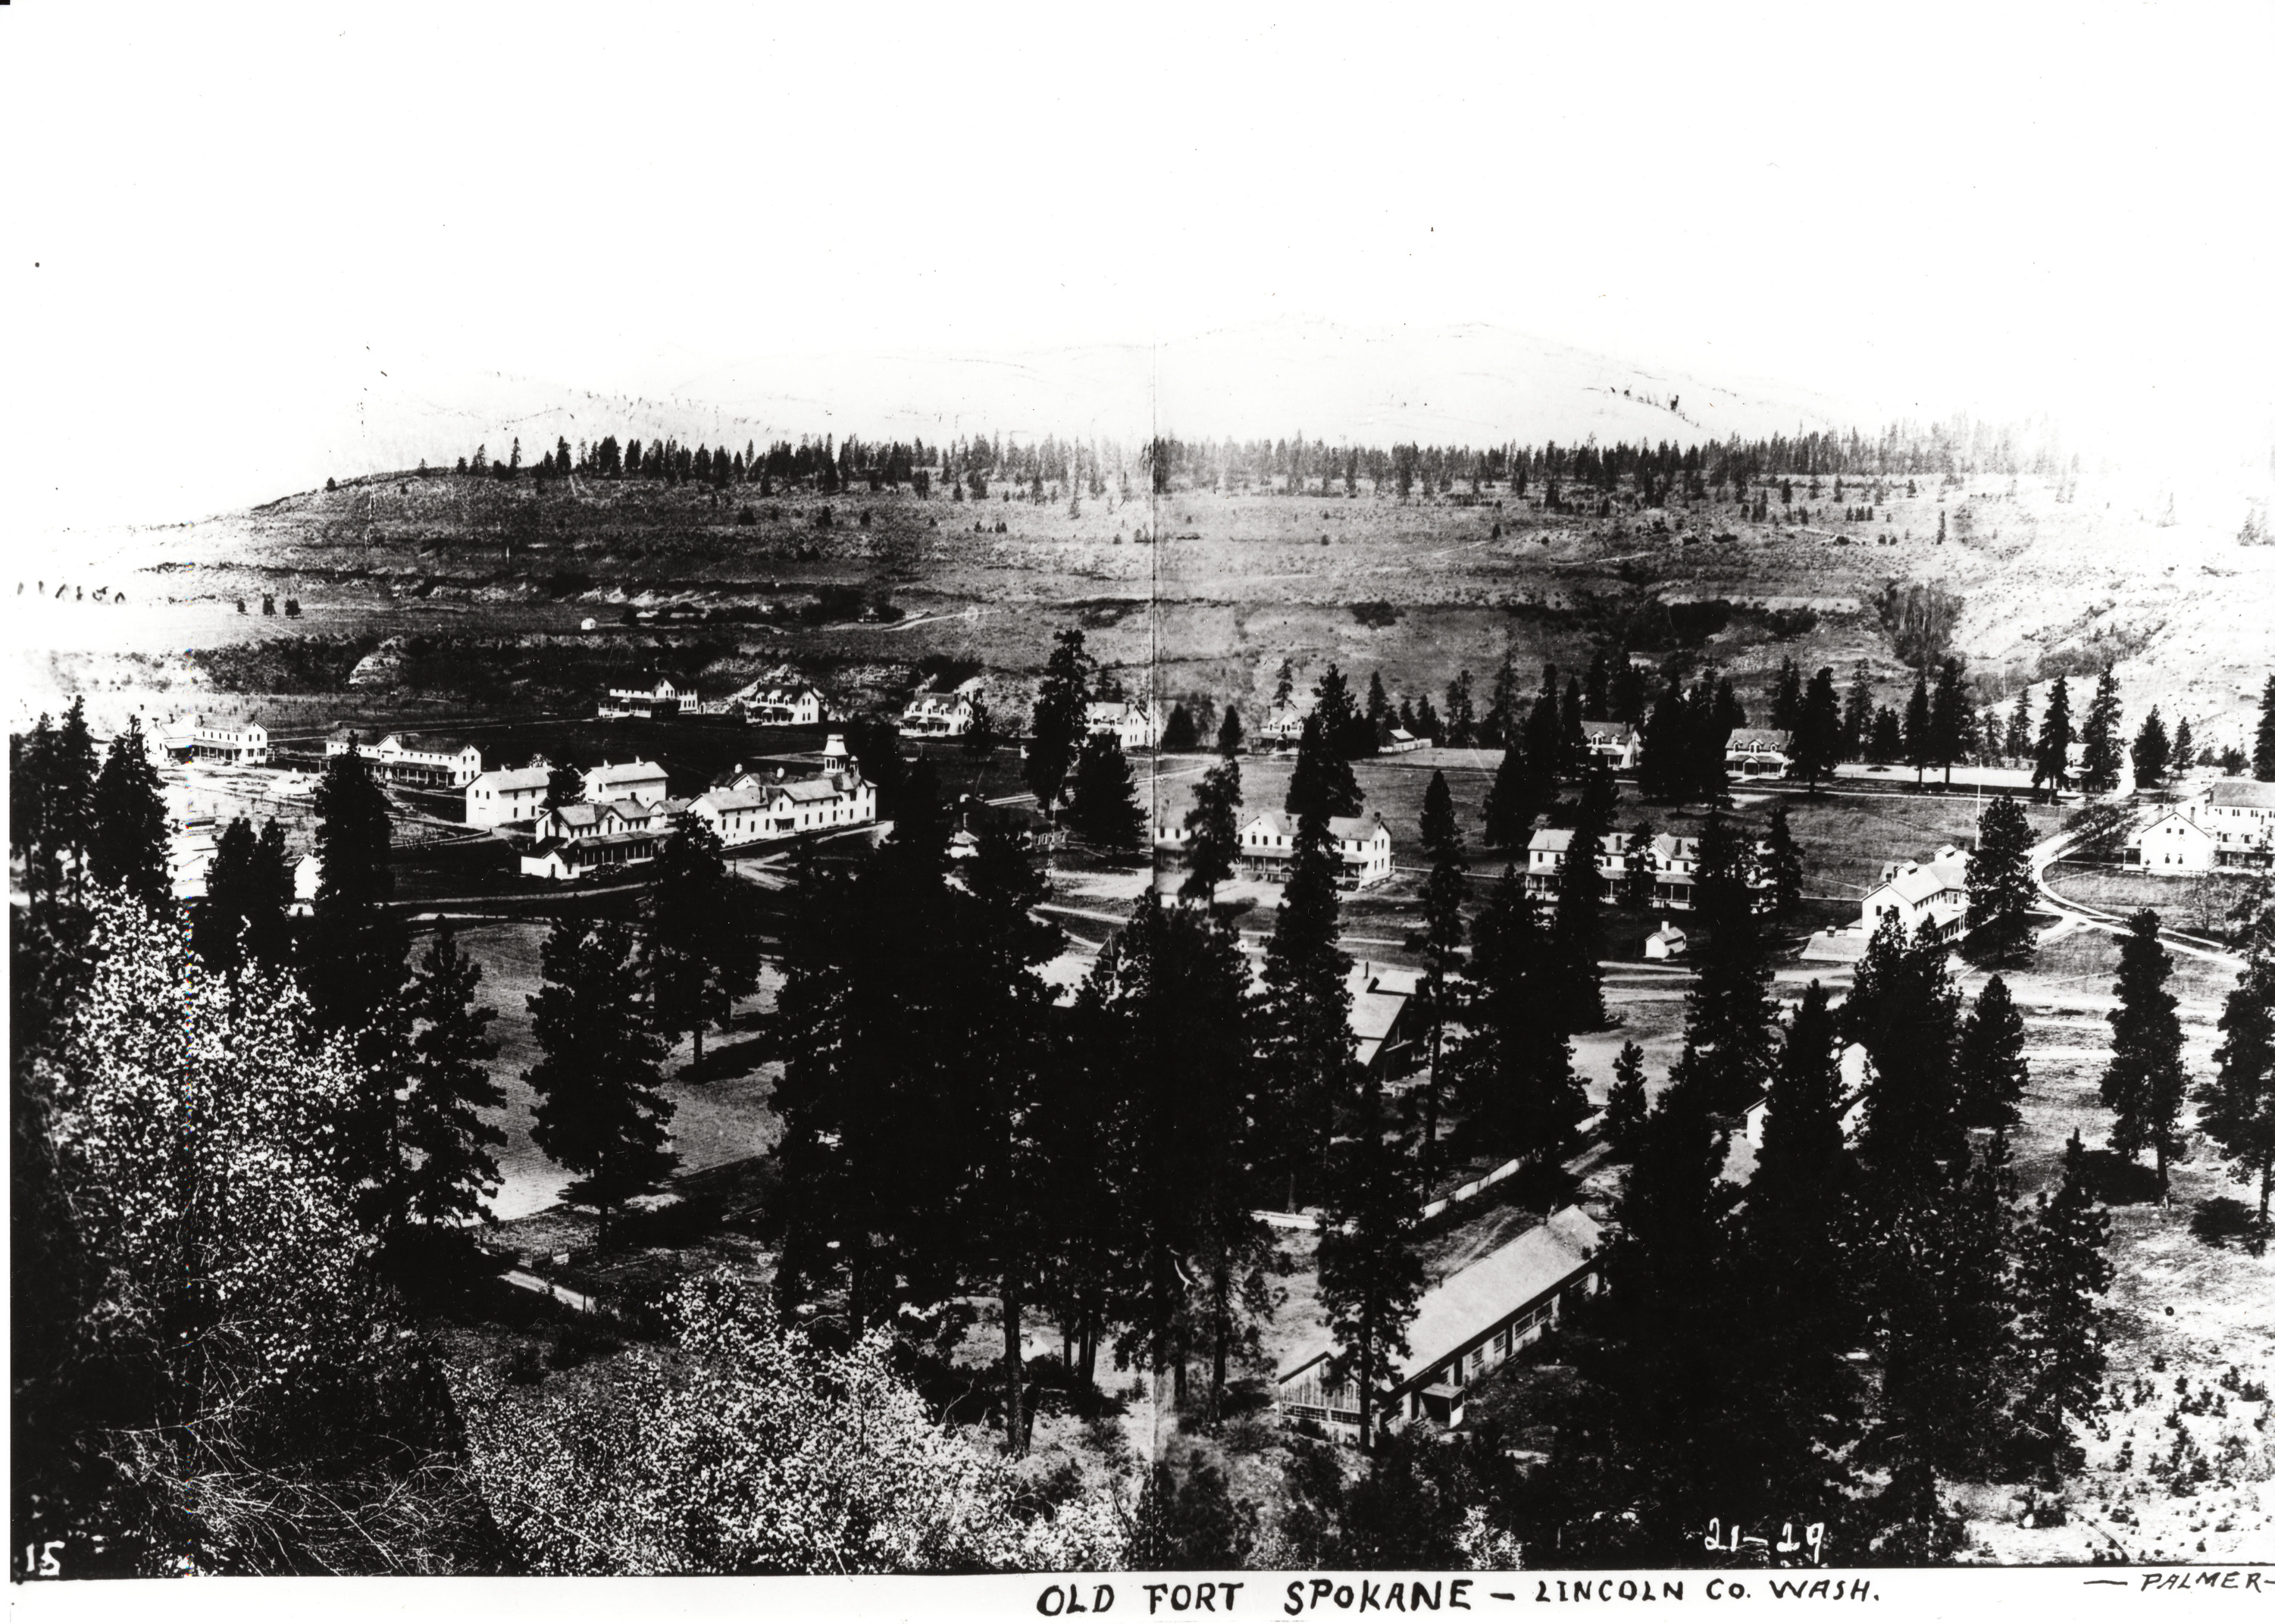 Black and white photograph of buildings and trees in a valley